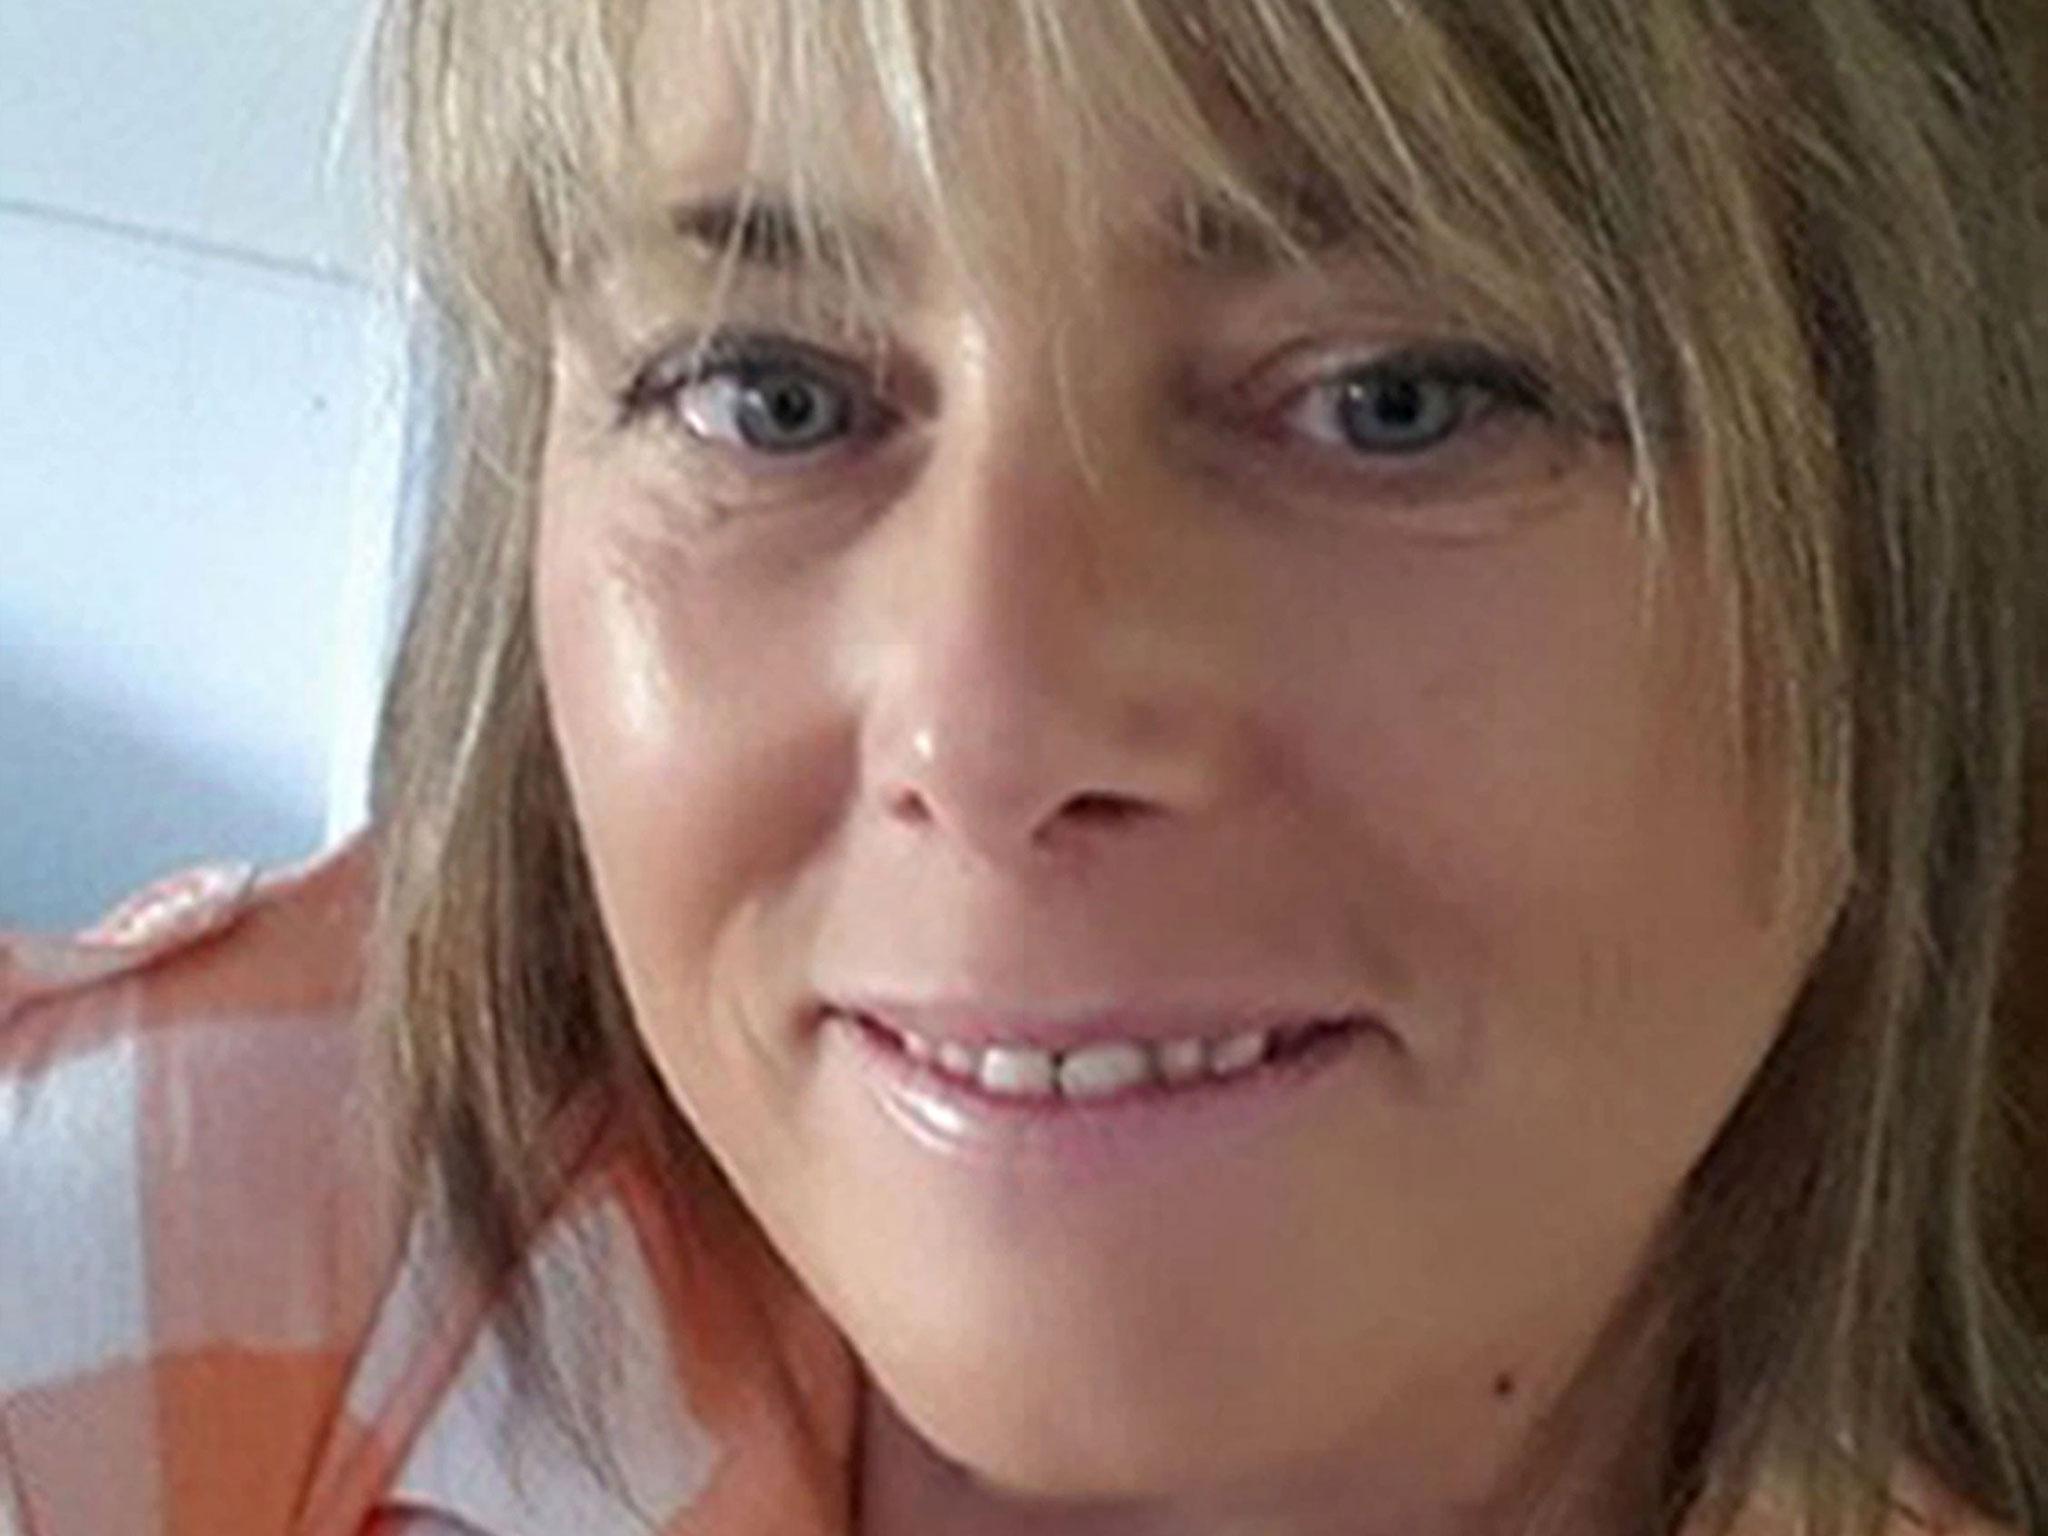 Wendy Fawell was the 19th victim to be formally named out of the 22 people who died in the suicide bomb attack